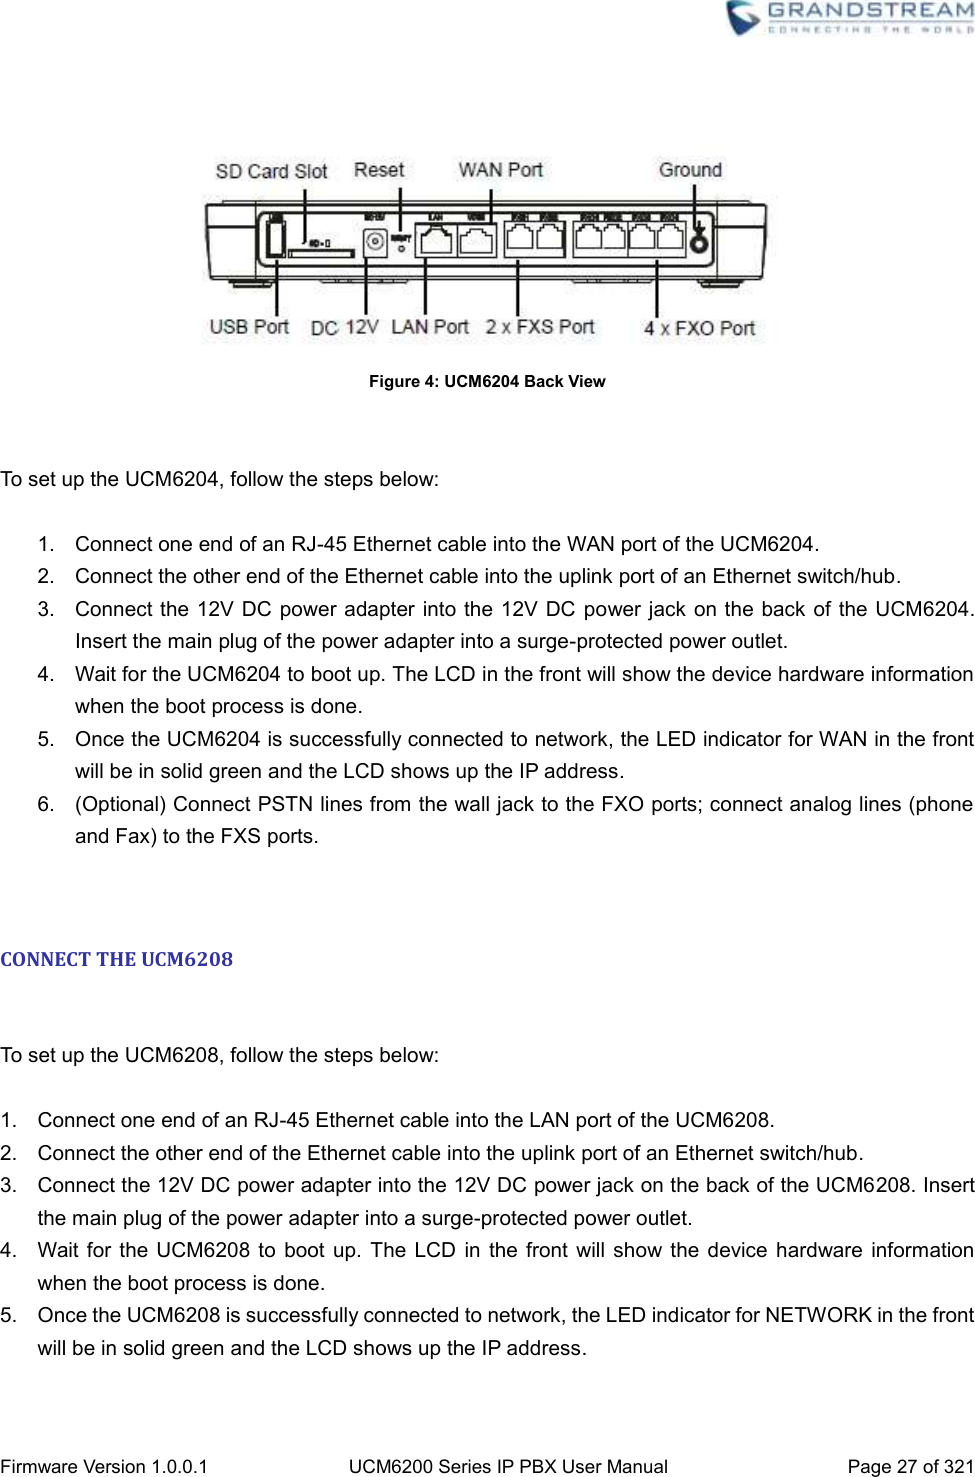  Firmware Version 1.0.0.1 UCM6200 Series IP PBX User Manual Page 27 of 321       Figure 4: UCM6204 Back View   To set up the UCM6204, follow the steps below:  1.  Connect one end of an RJ-45 Ethernet cable into the WAN port of the UCM6204. 2.  Connect the other end of the Ethernet cable into the uplink port of an Ethernet switch/hub. 3.  Connect the 12V DC  power adapter into the 12V DC  power jack on the back of the UCM6204. Insert the main plug of the power adapter into a surge-protected power outlet. 4.  Wait for the UCM6204 to boot up. The LCD in the front will show the device hardware information when the boot process is done. 5.  Once the UCM6204 is successfully connected to network, the LED indicator for WAN in the front will be in solid green and the LCD shows up the IP address. 6.  (Optional) Connect PSTN lines from the wall jack to the FXO ports; connect analog lines (phone and Fax) to the FXS ports.   CONNECT THE UCM6208  To set up the UCM6208, follow the steps below:  1.  Connect one end of an RJ-45 Ethernet cable into the LAN port of the UCM6208. 2.  Connect the other end of the Ethernet cable into the uplink port of an Ethernet switch/hub. 3.  Connect the 12V DC power adapter into the 12V DC power jack on the back of the UCM6208. Insert the main plug of the power adapter into a surge-protected power outlet. 4.  Wait for  the UCM6208 to  boot up. The  LCD in the front  will show the  device  hardware  information when the boot process is done. 5.  Once the UCM6208 is successfully connected to network, the LED indicator for NETWORK in the front will be in solid green and the LCD shows up the IP address. 